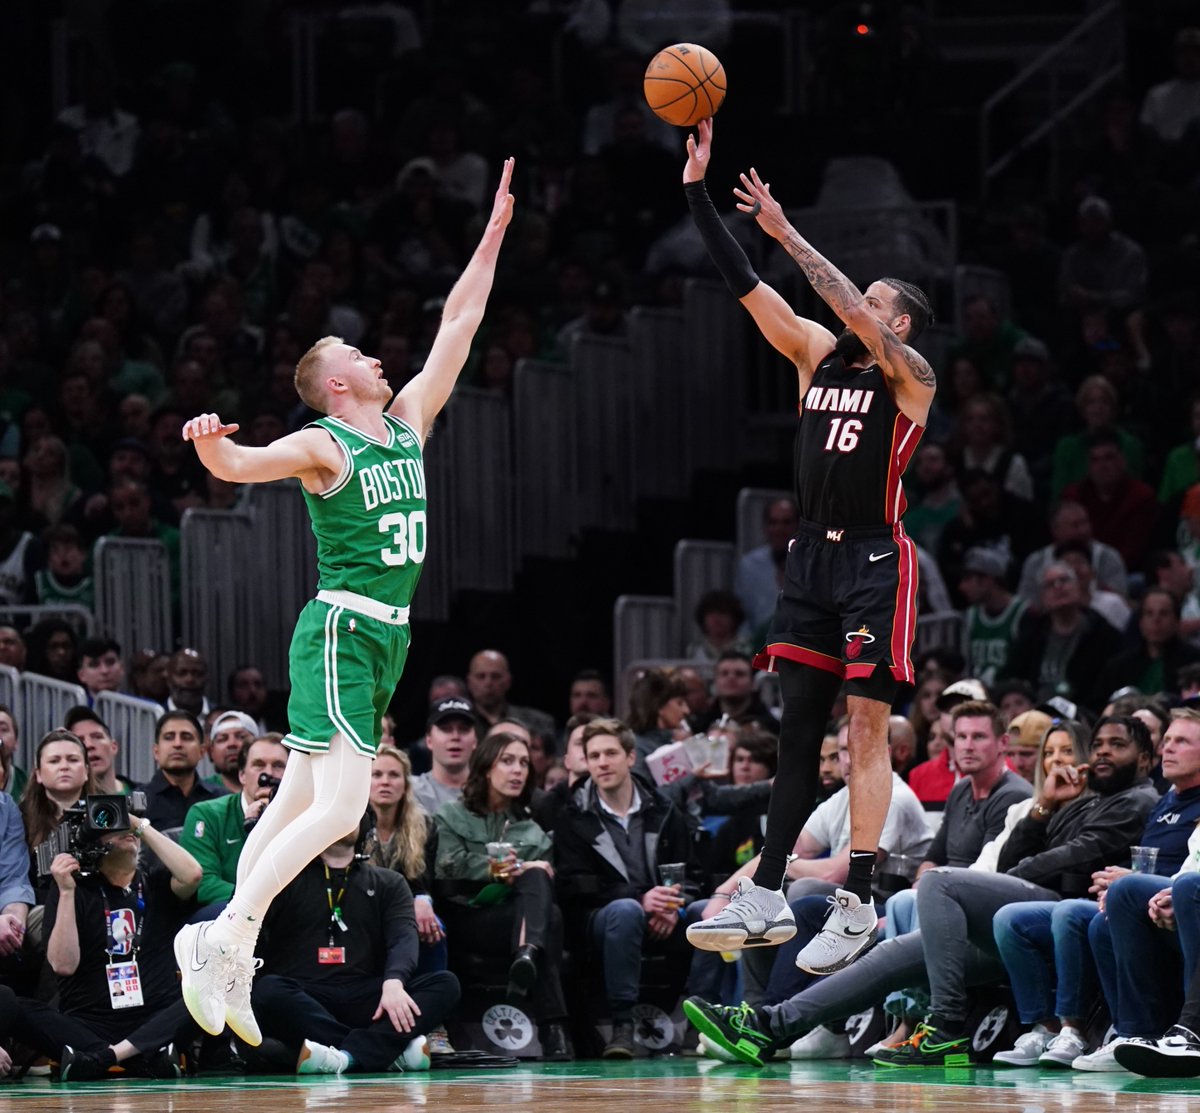 The @MiamiHeat were en fuego from deep in a Game 2 upset. 🔥 More here: bit.ly/44eIC0g Can they give the @Celtics a real run? 🏀 Check out #NBA options with #Proline: bit.ly/3xLUJWk 📸: USA TODAY Sports @StadeProligne